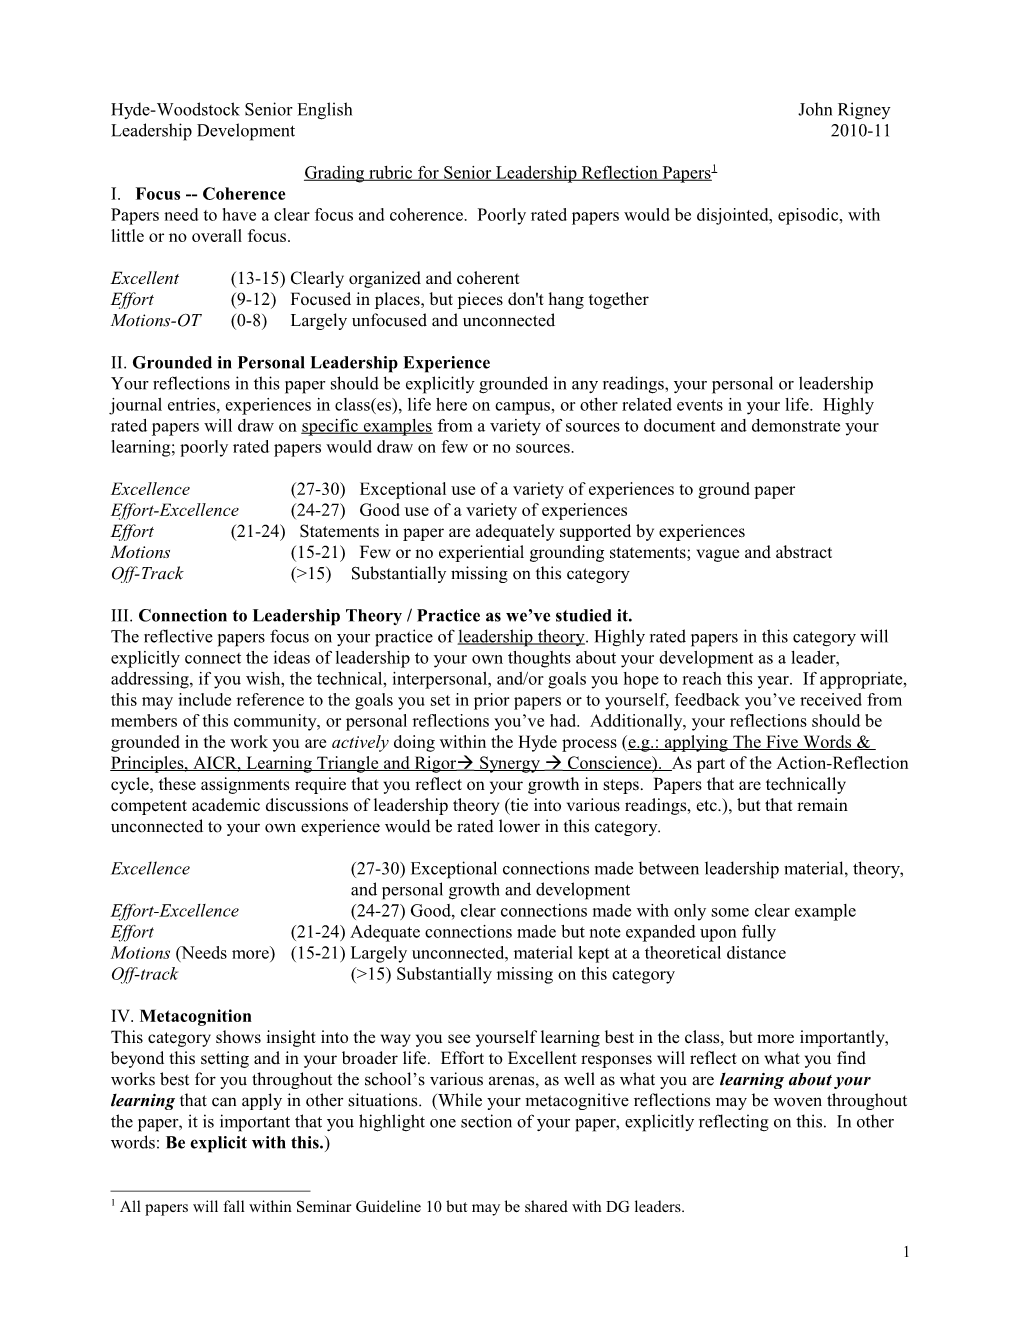 Grading Rubric For Leadership Reflective Papers